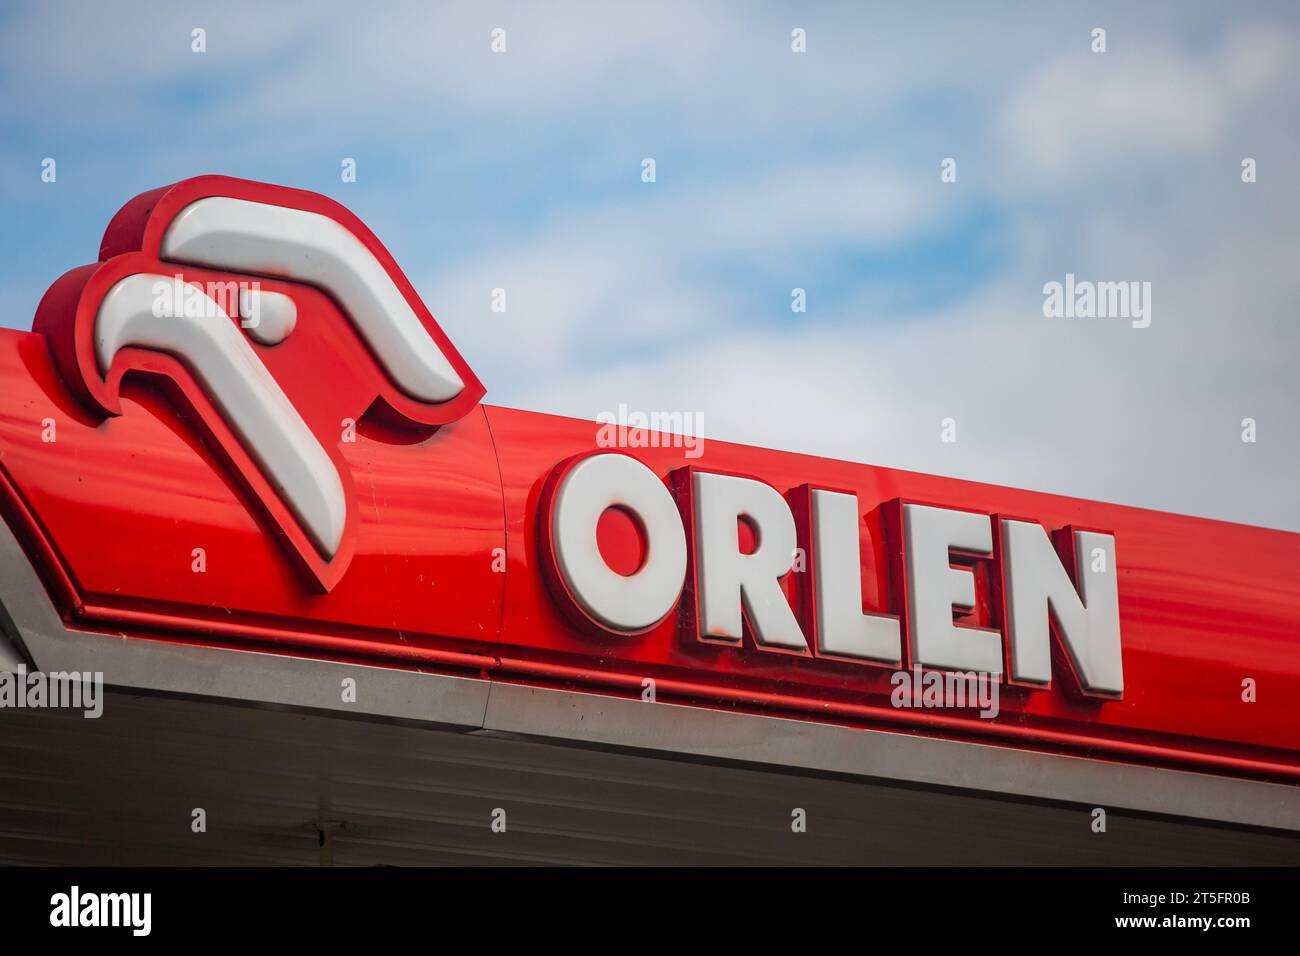 Poznan, Poland - June 11, 2022: Logotype at the Orlen gas station in Poznan, Poland. Stock Photo